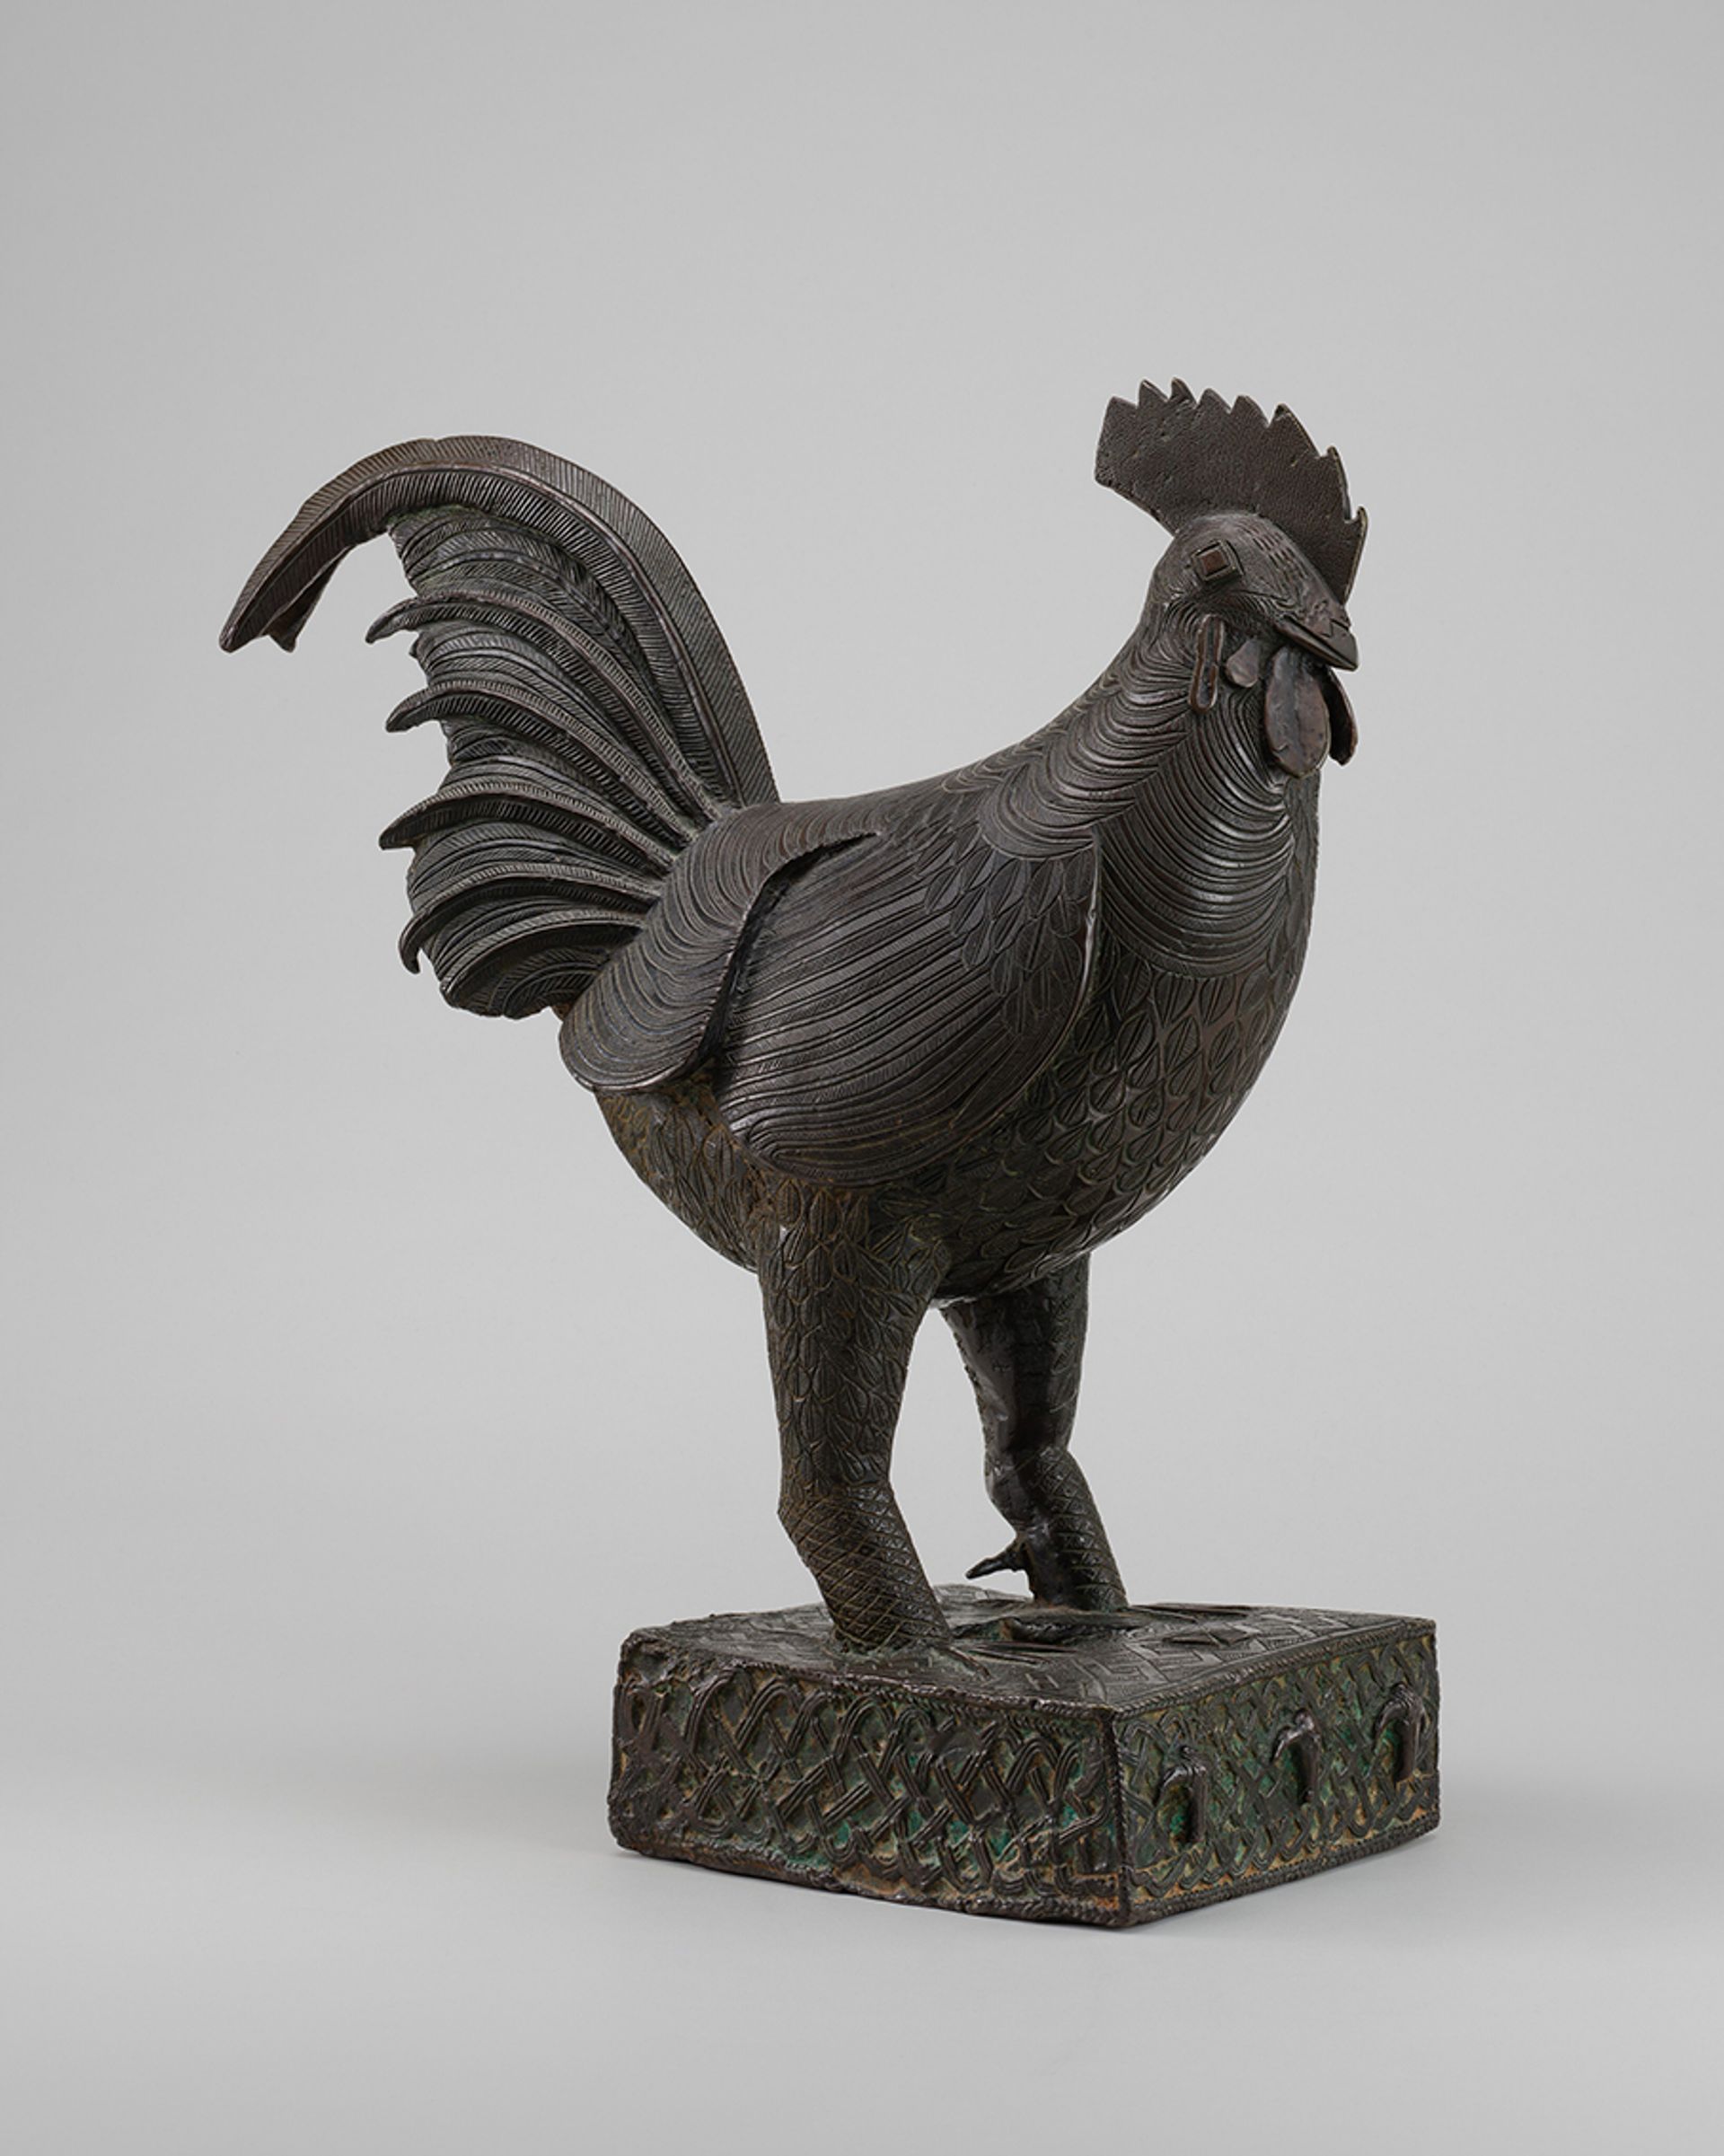  Looted Benin Cockerel Is Returning To Nigeria According To The National Gallery of Art in Washington, DC Plans